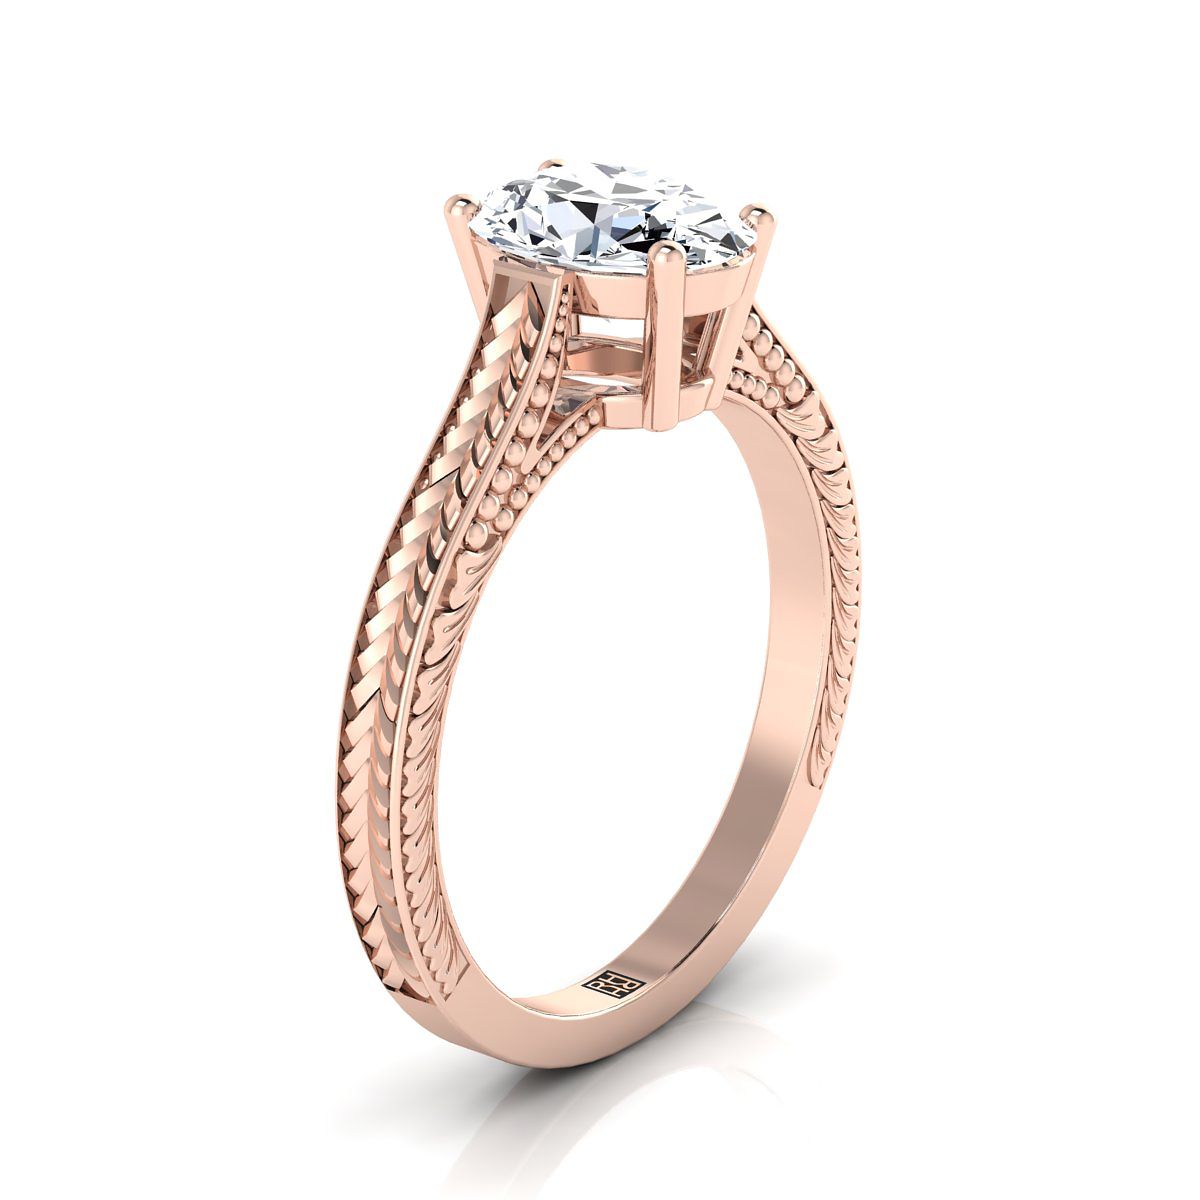 14K Rose Gold Oval Pink Sapphire Hand Engraved Vintage Cathedral Style Solitaire Engagement Ring